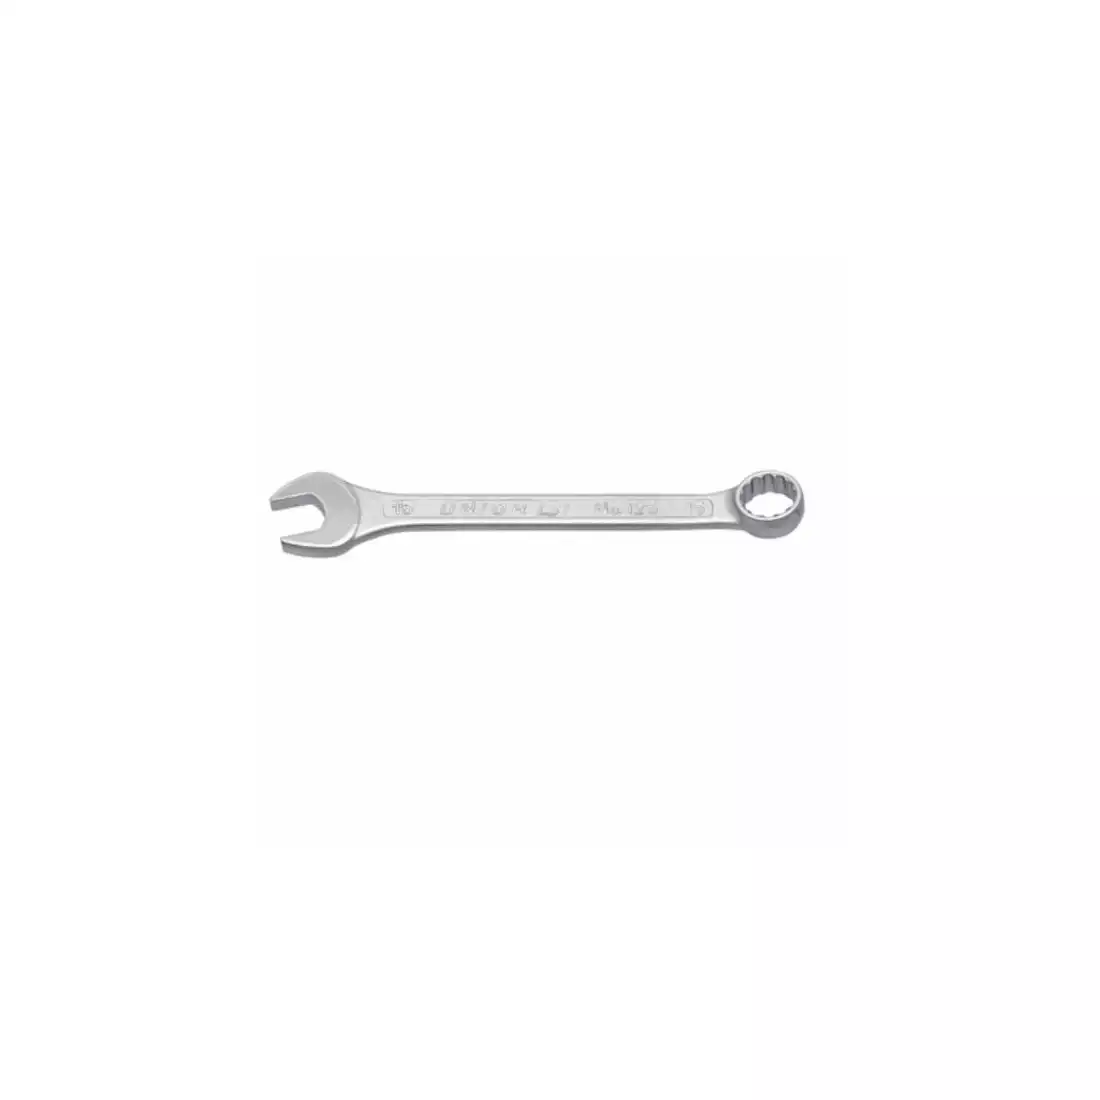 UNIOR combination wrench, short type 7 mm